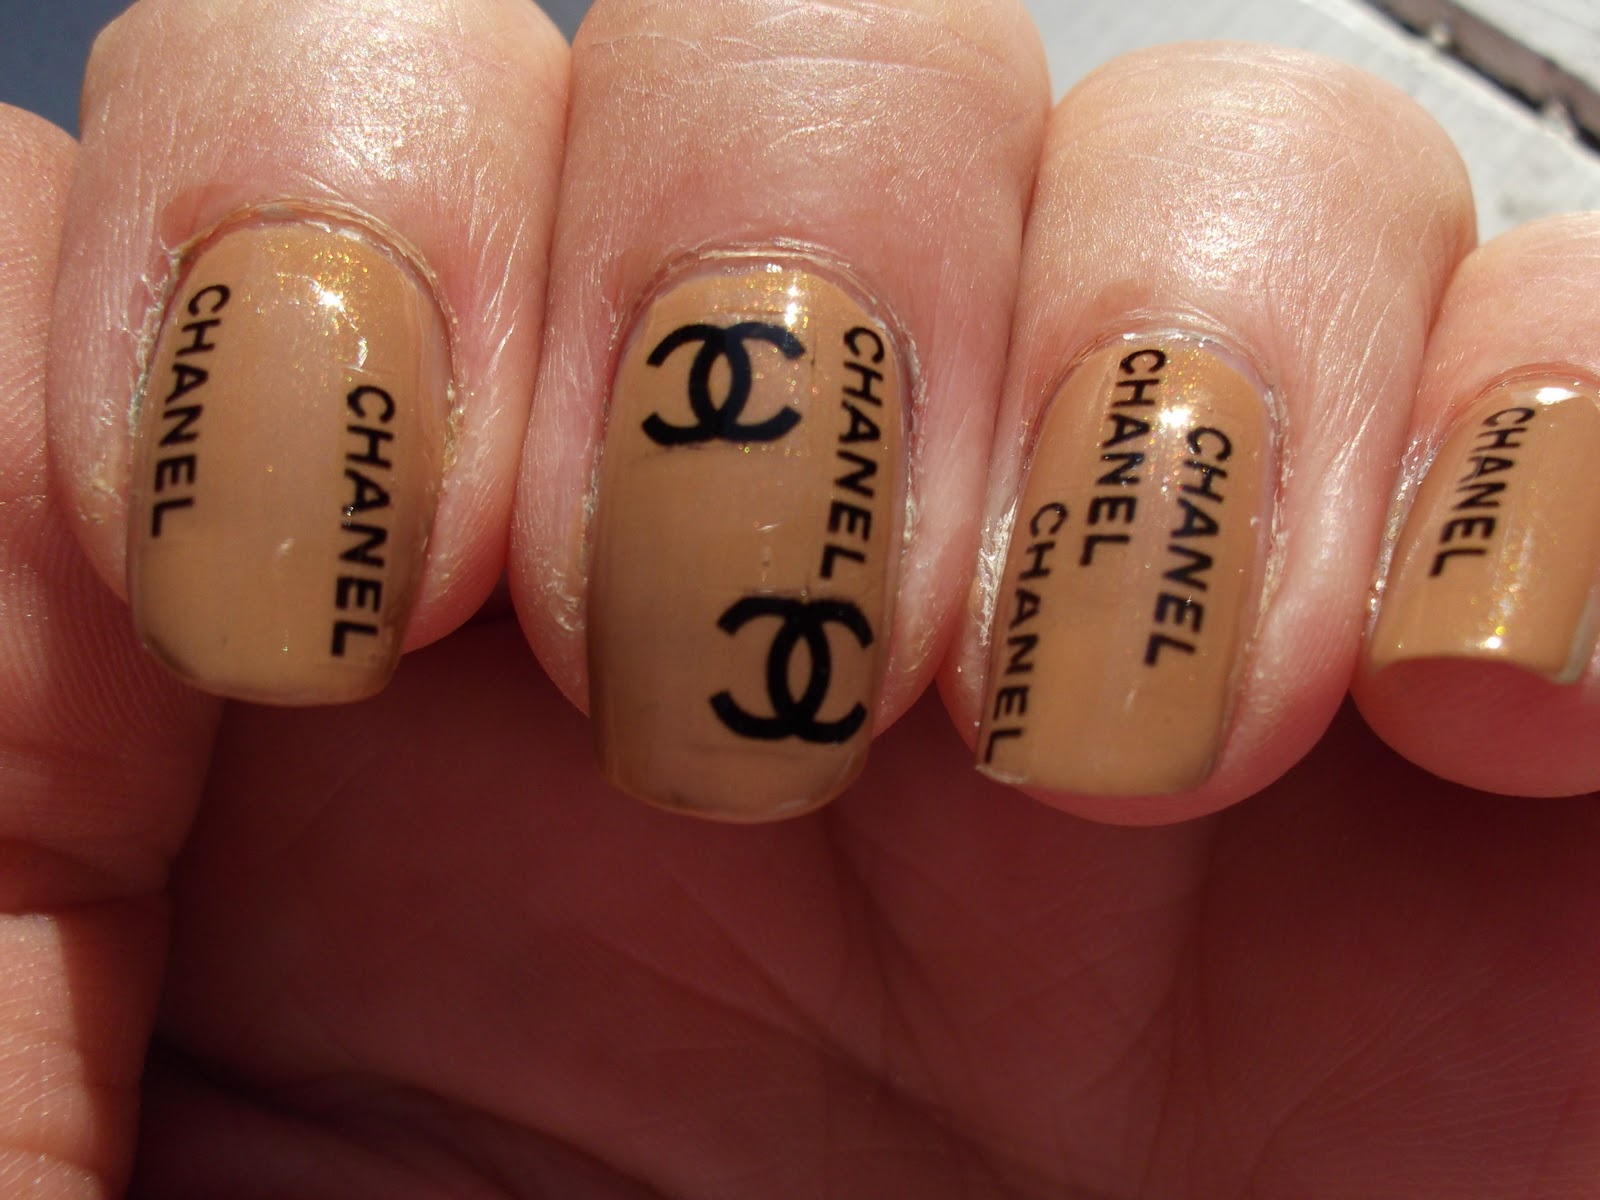 3. Chanel Inspired Dripping Nails - wide 7